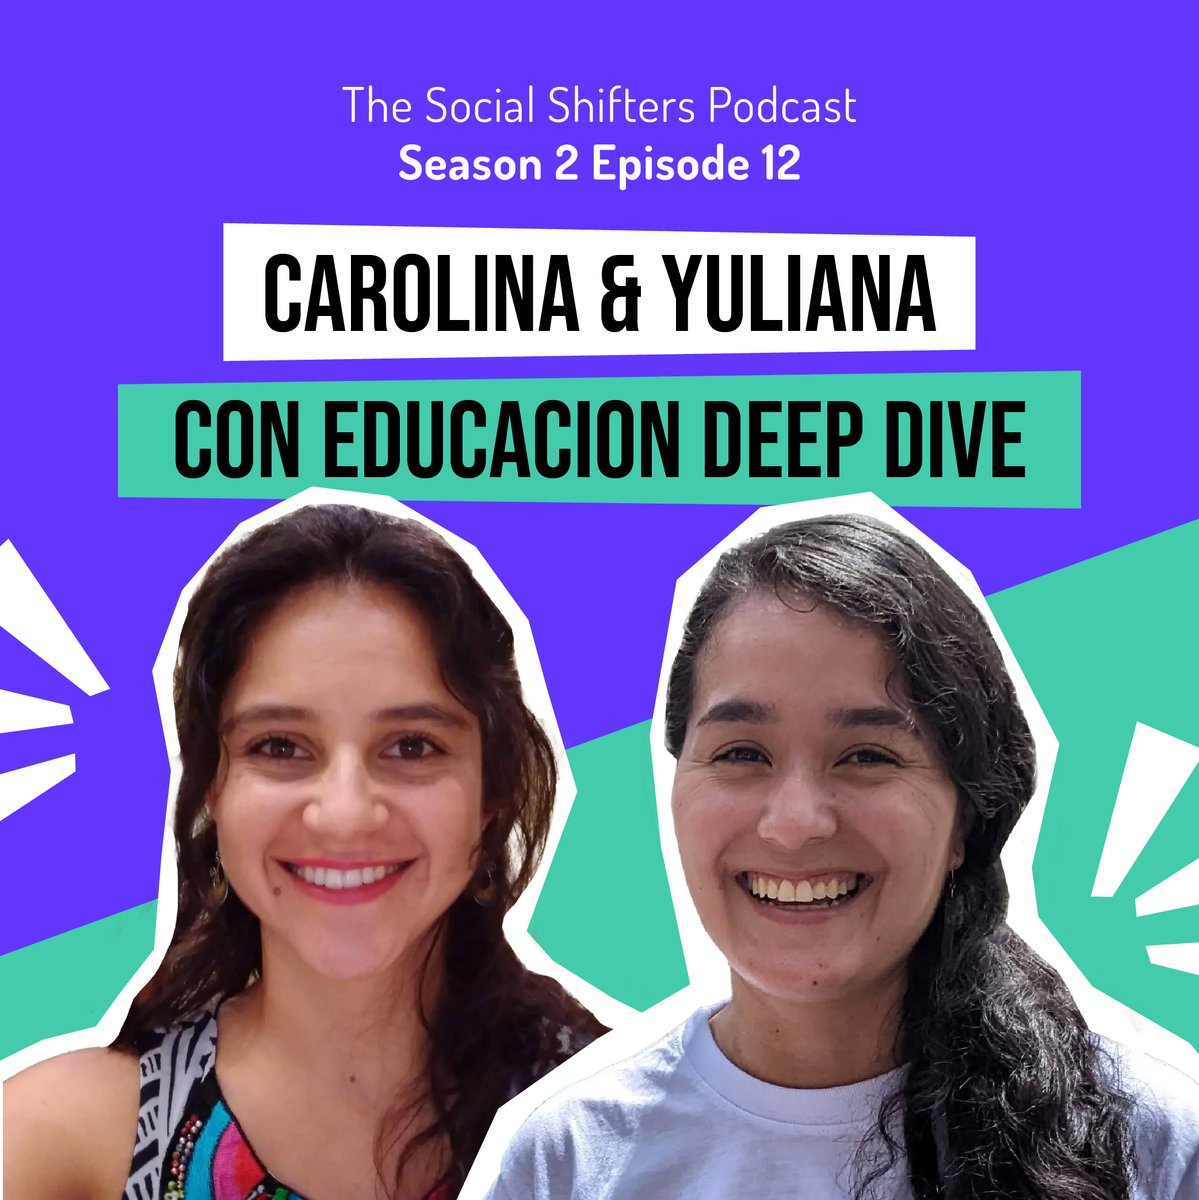 ConEducación: Inspiring change in rural Colombia (OUT NOW!) Hear student struggles & triumphs. How ConEducación bridges the gap to educational equity. Family, culture, mentorship & ambitious plans! Don't miss out! Listen now! youtu.be/REbIGFTpl-s